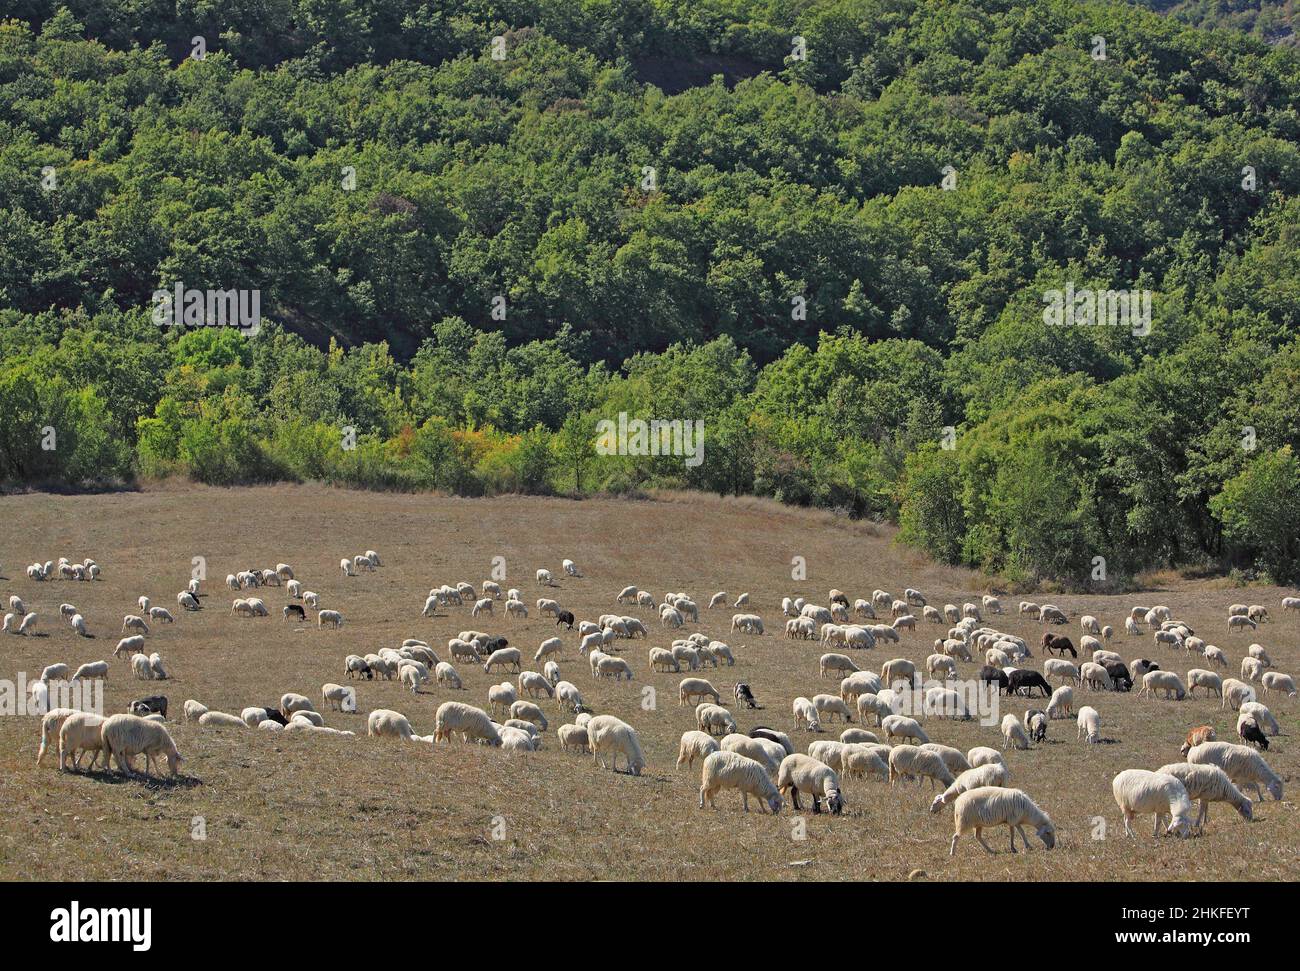 Schafherde with San Quirico of d' Orcia, autumn, Crete, Tuscany, Italy / sheeps near San Quirico of d' Orcia, Crete, Tuscany, Italy Stock Photo